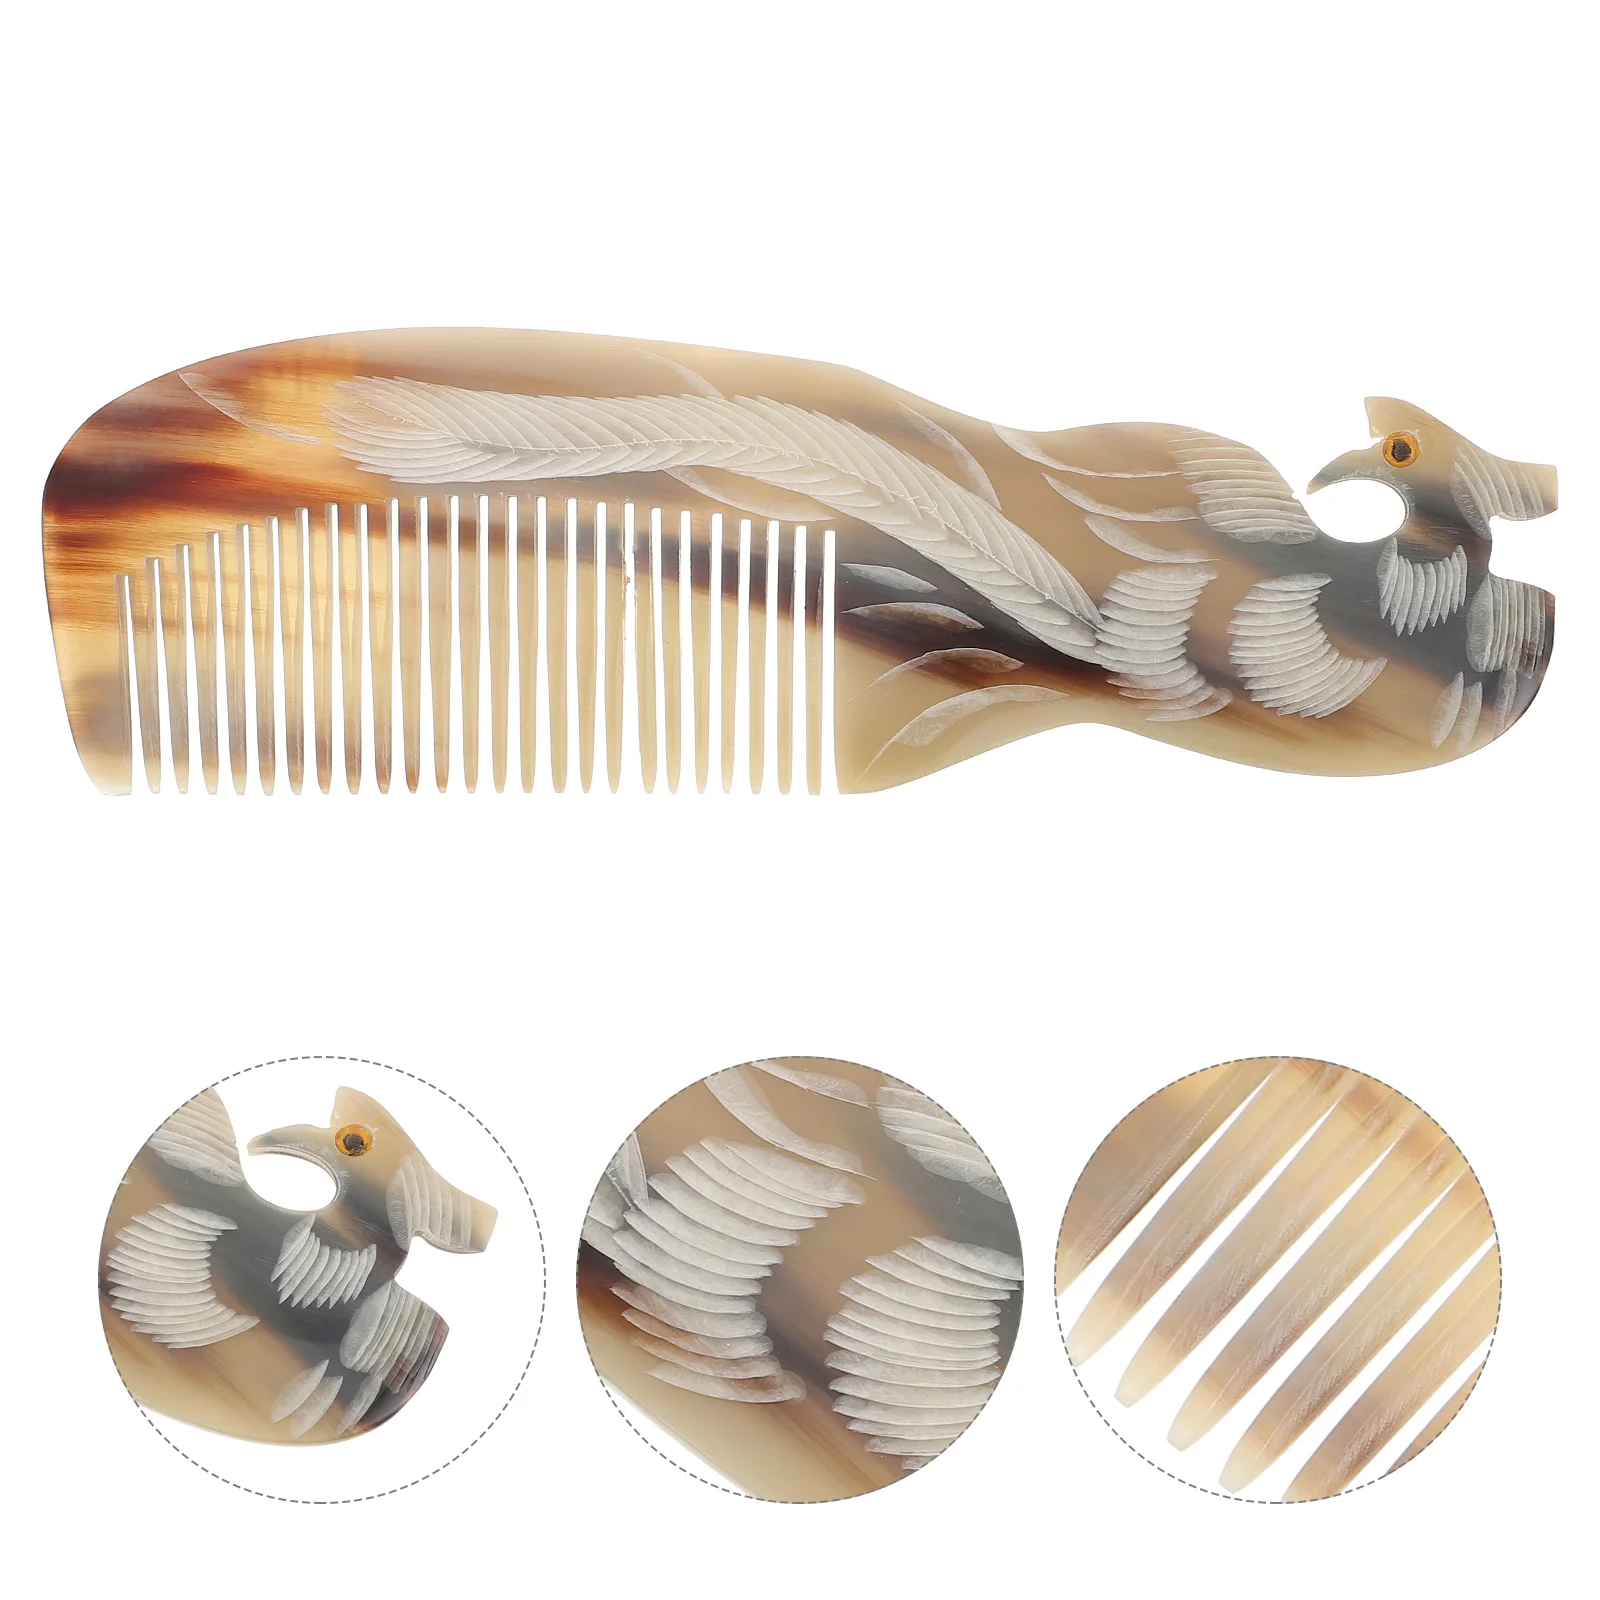 

Comb Horn Hair Beard Combs Oxtoothpocket Fine Bone Women Natural Wide Static Anti Sided Double Mini Men Curly Giftshairdressing